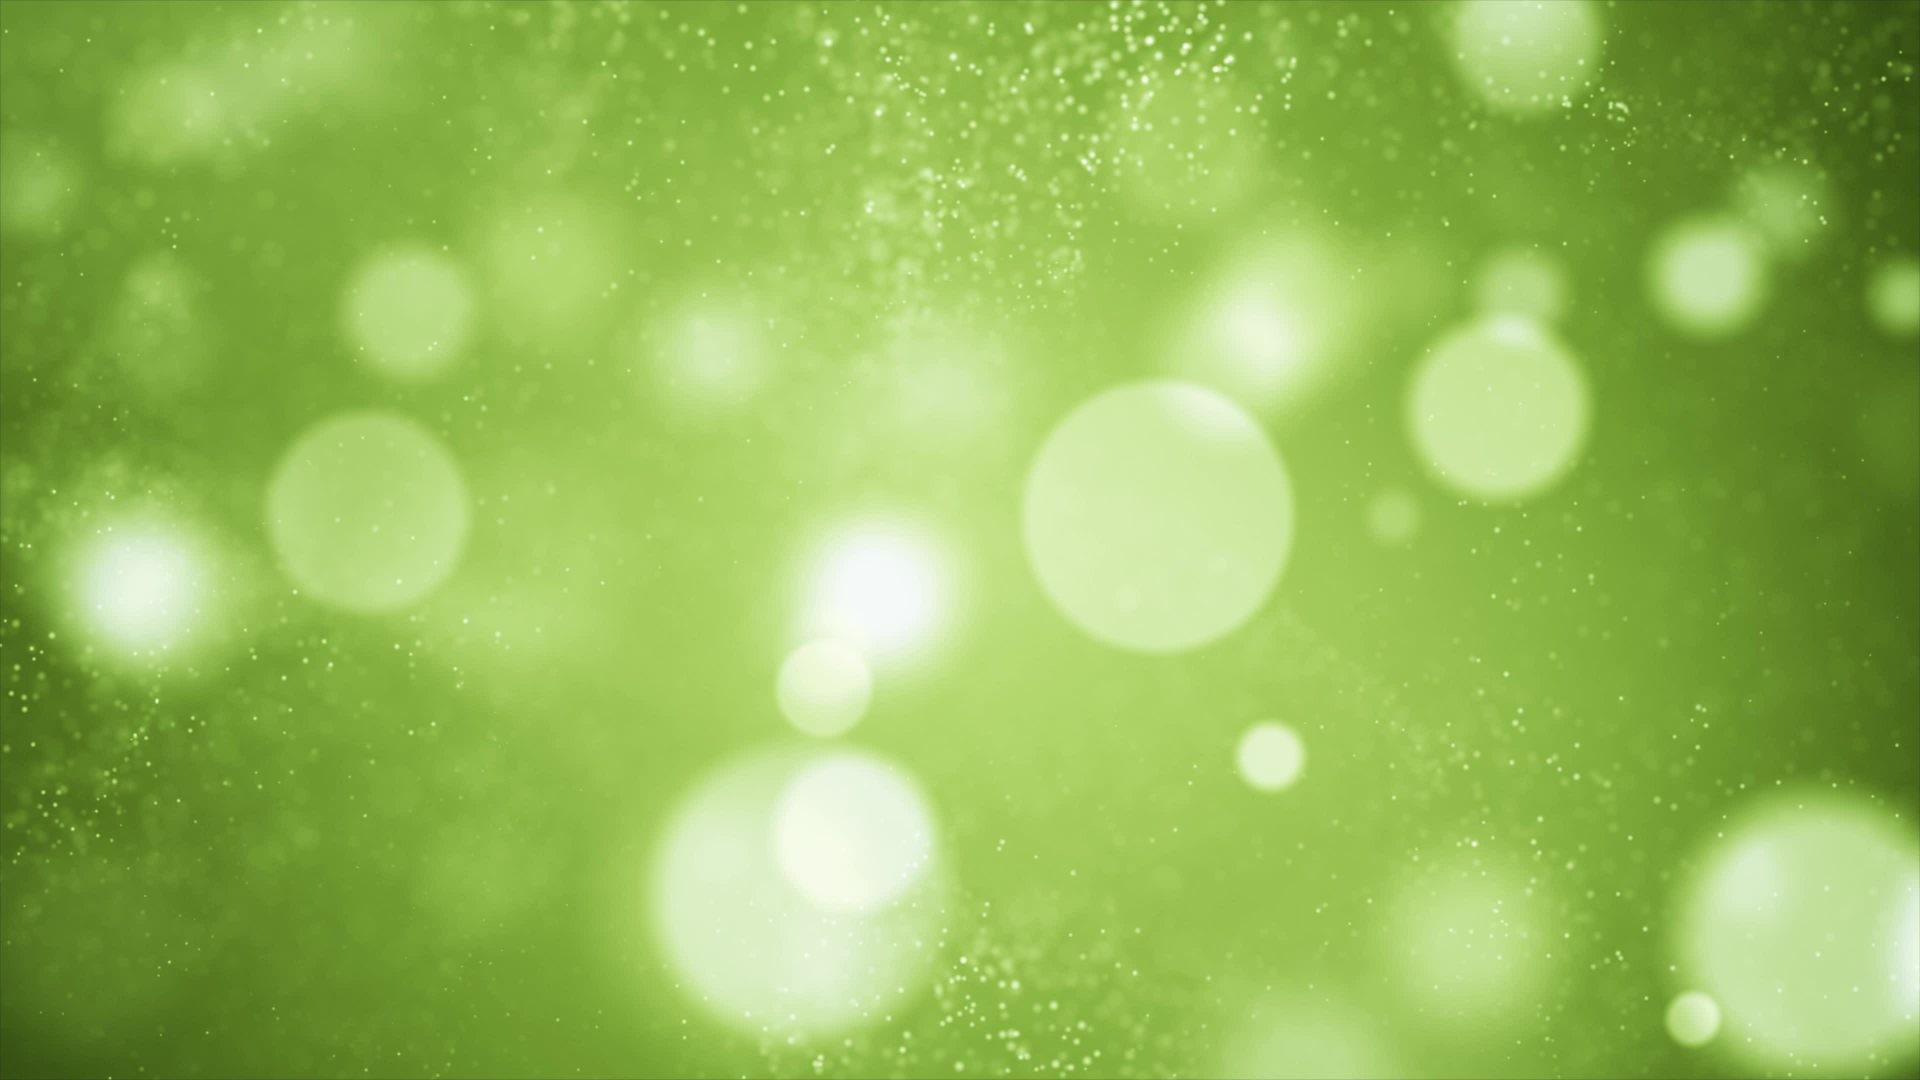 1920x1080 Lime Green Drift 4K Motion Background - Free HD Video Clips & Stock Video  Footage at Videezy!